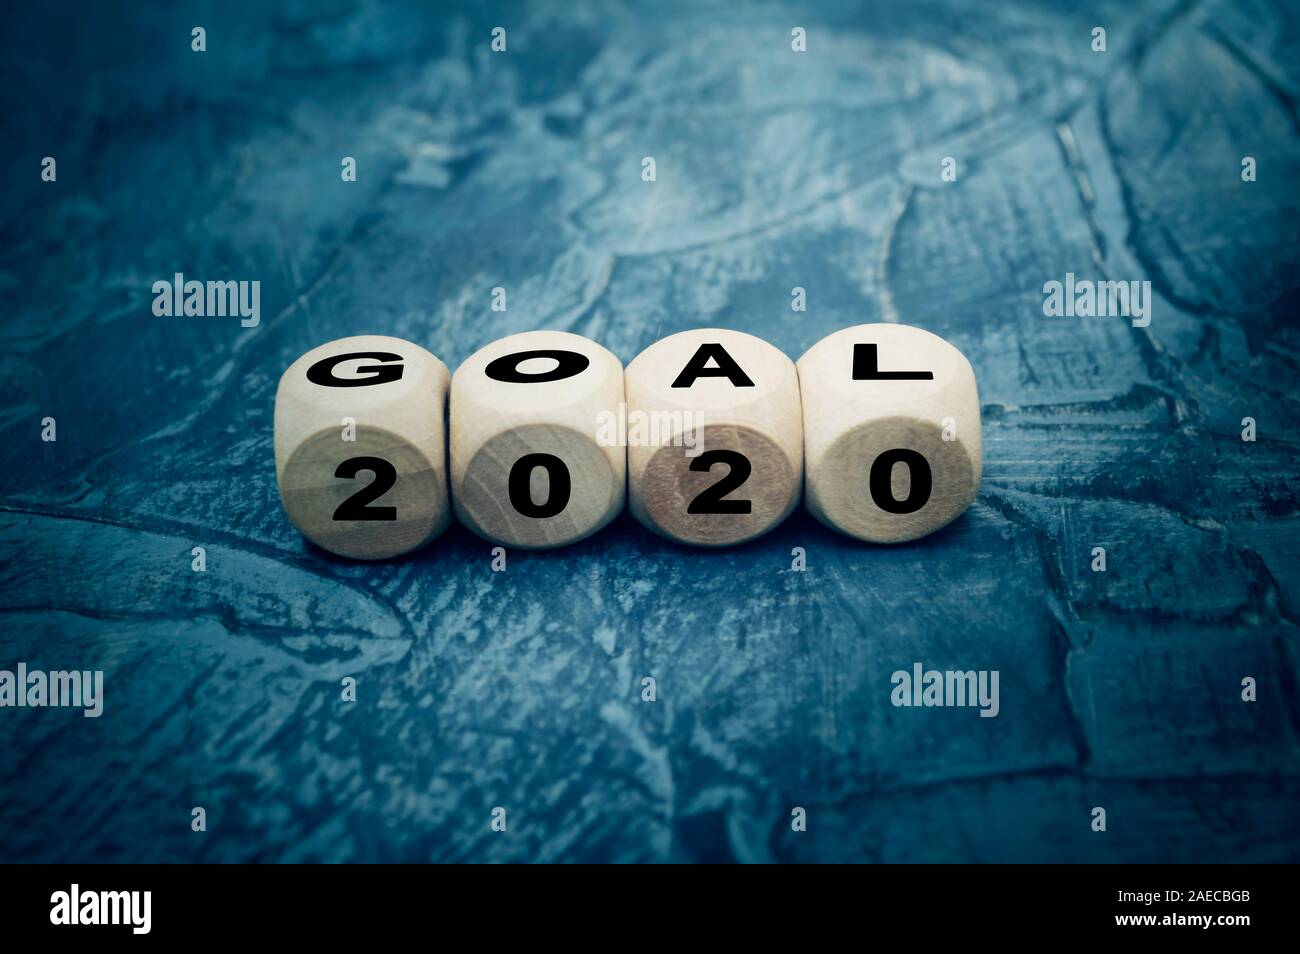 2020 goals text on wooden blocks. New year goals, plan, action, strategy, resolutions, business motivation, inspiration concept Stock Photo